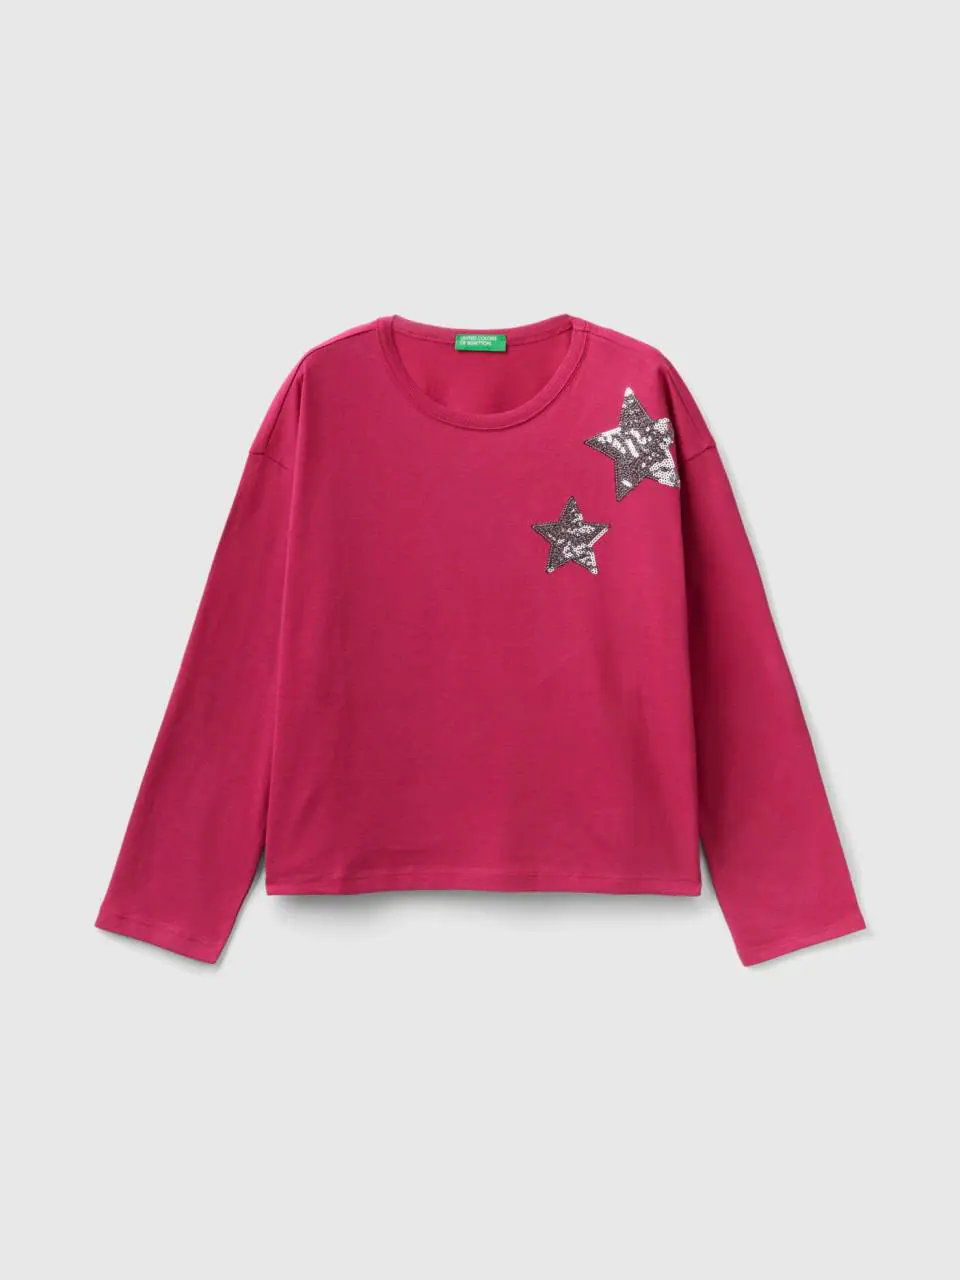 Benetton t-shirt with print and sequins. 1